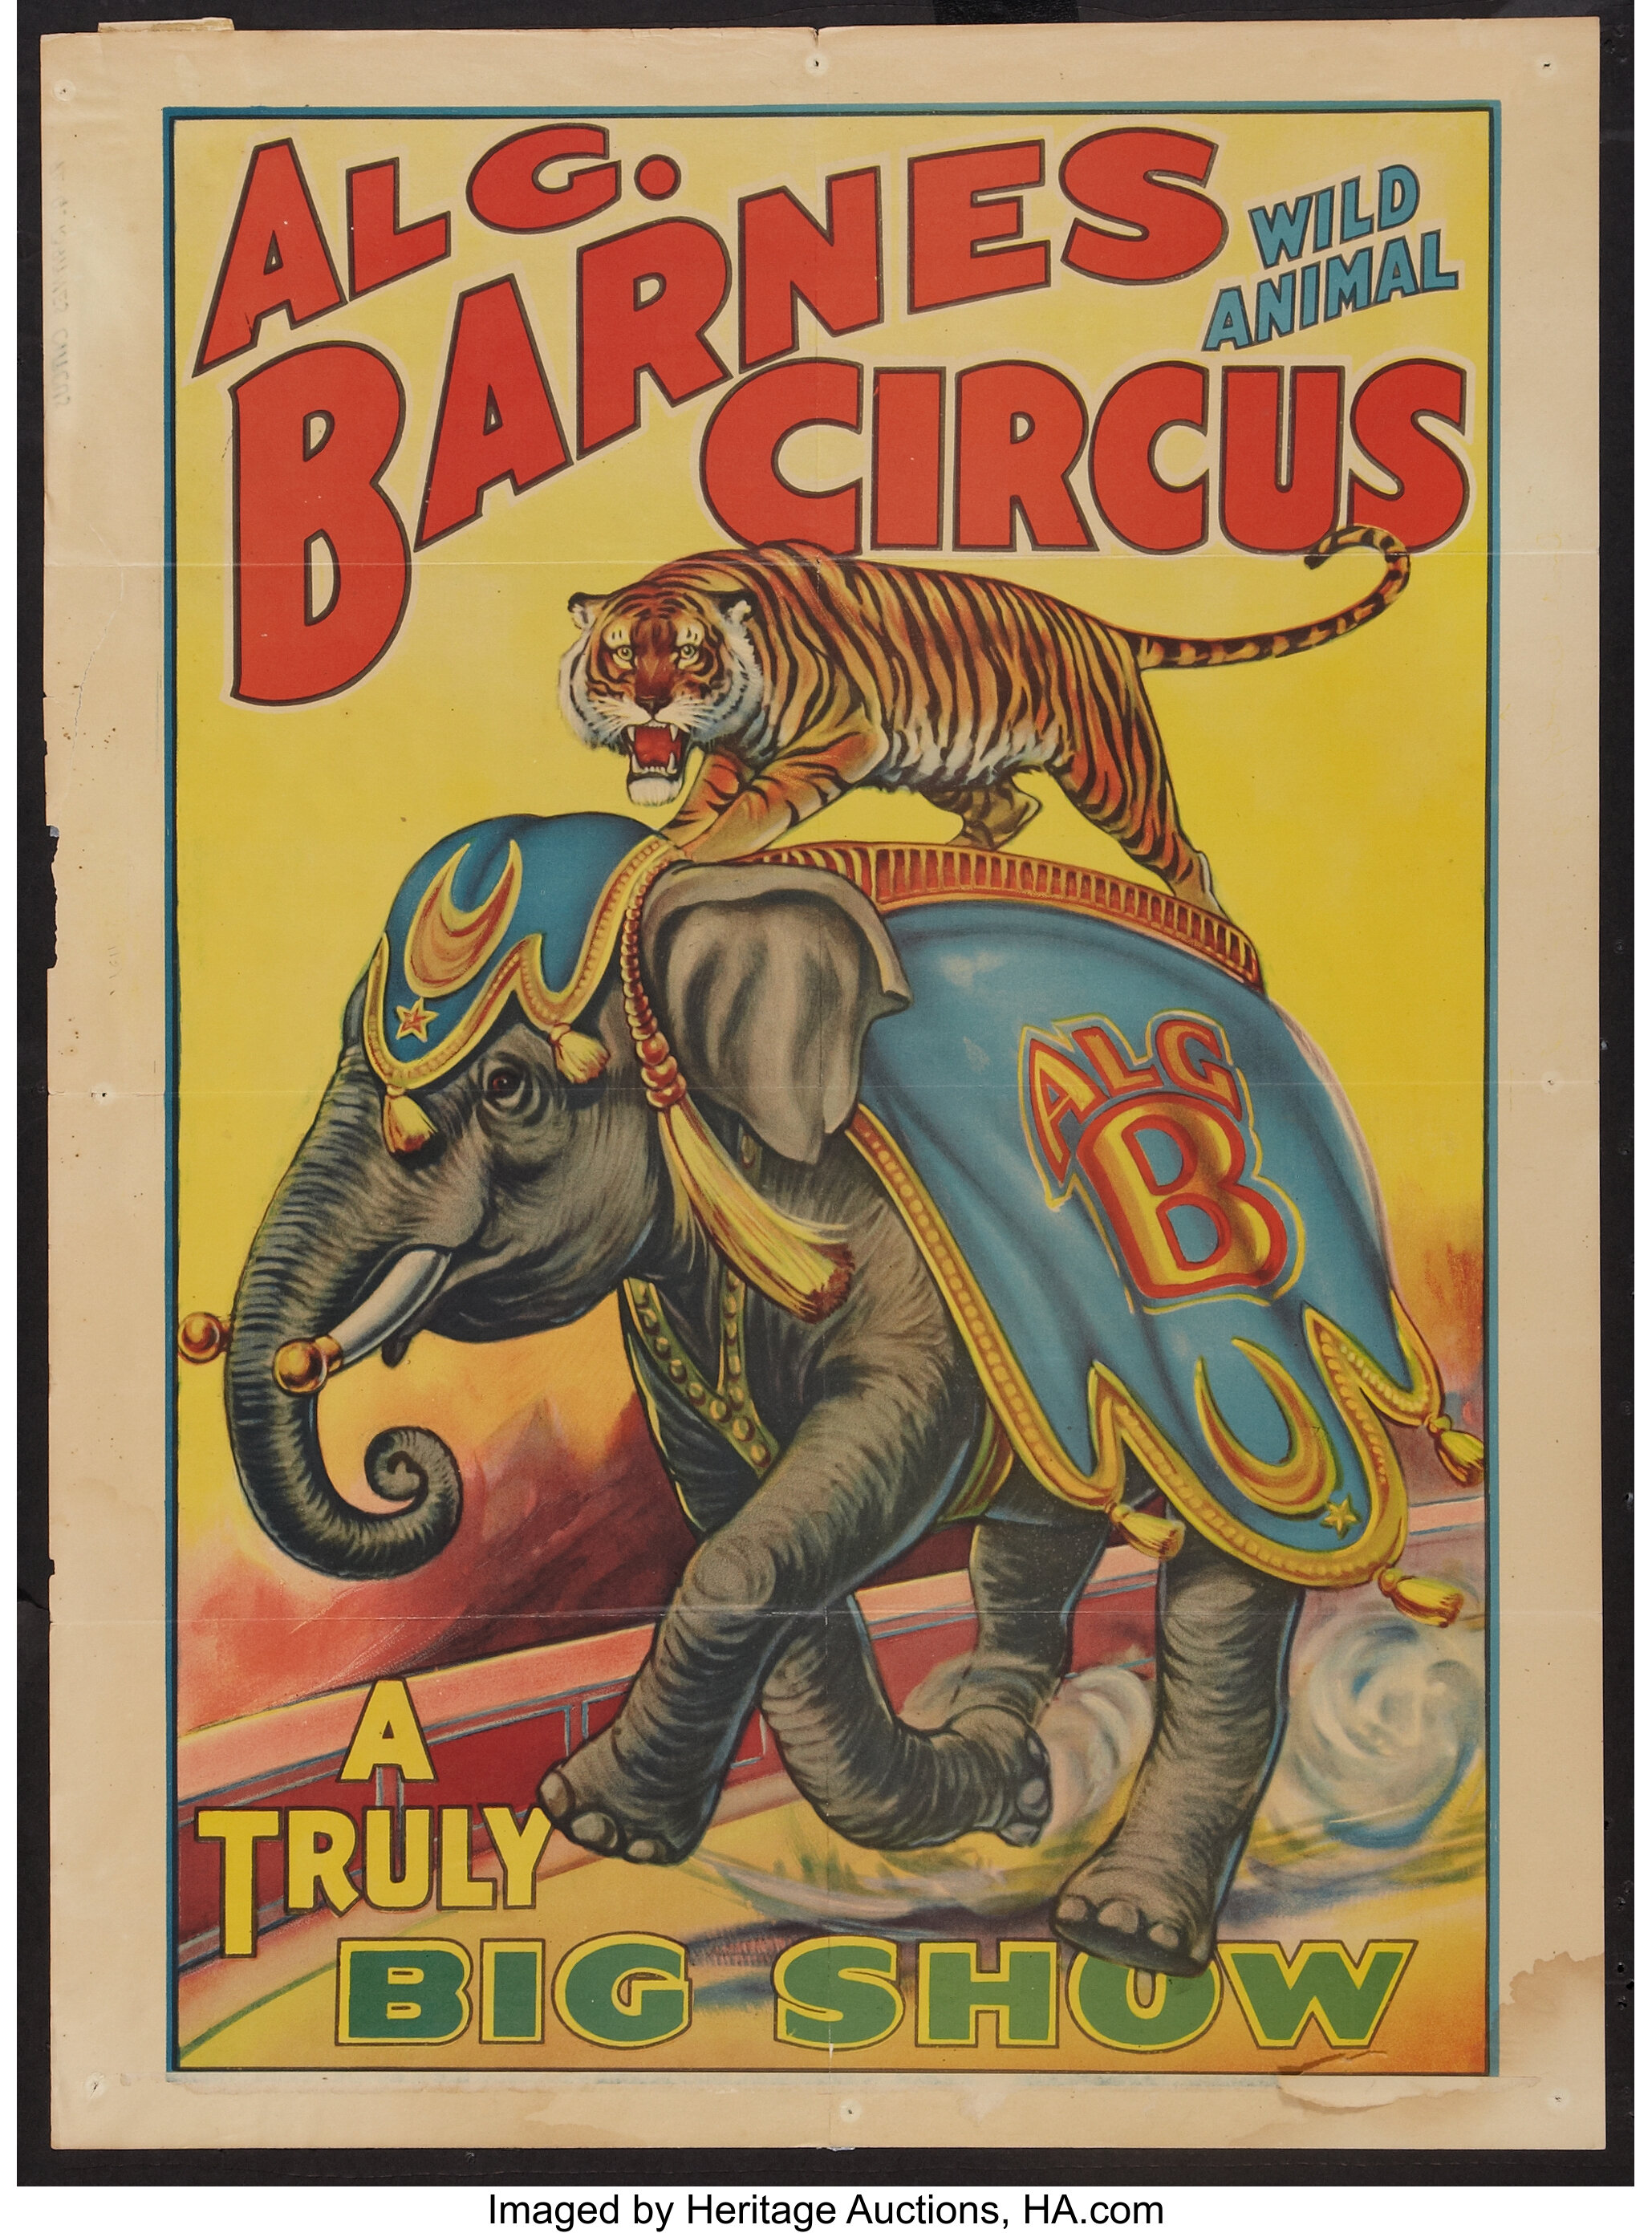 Al G Barnes Circus 1920s Circus Poster 20 75 X 28 Lot 50071 Heritage Auctions